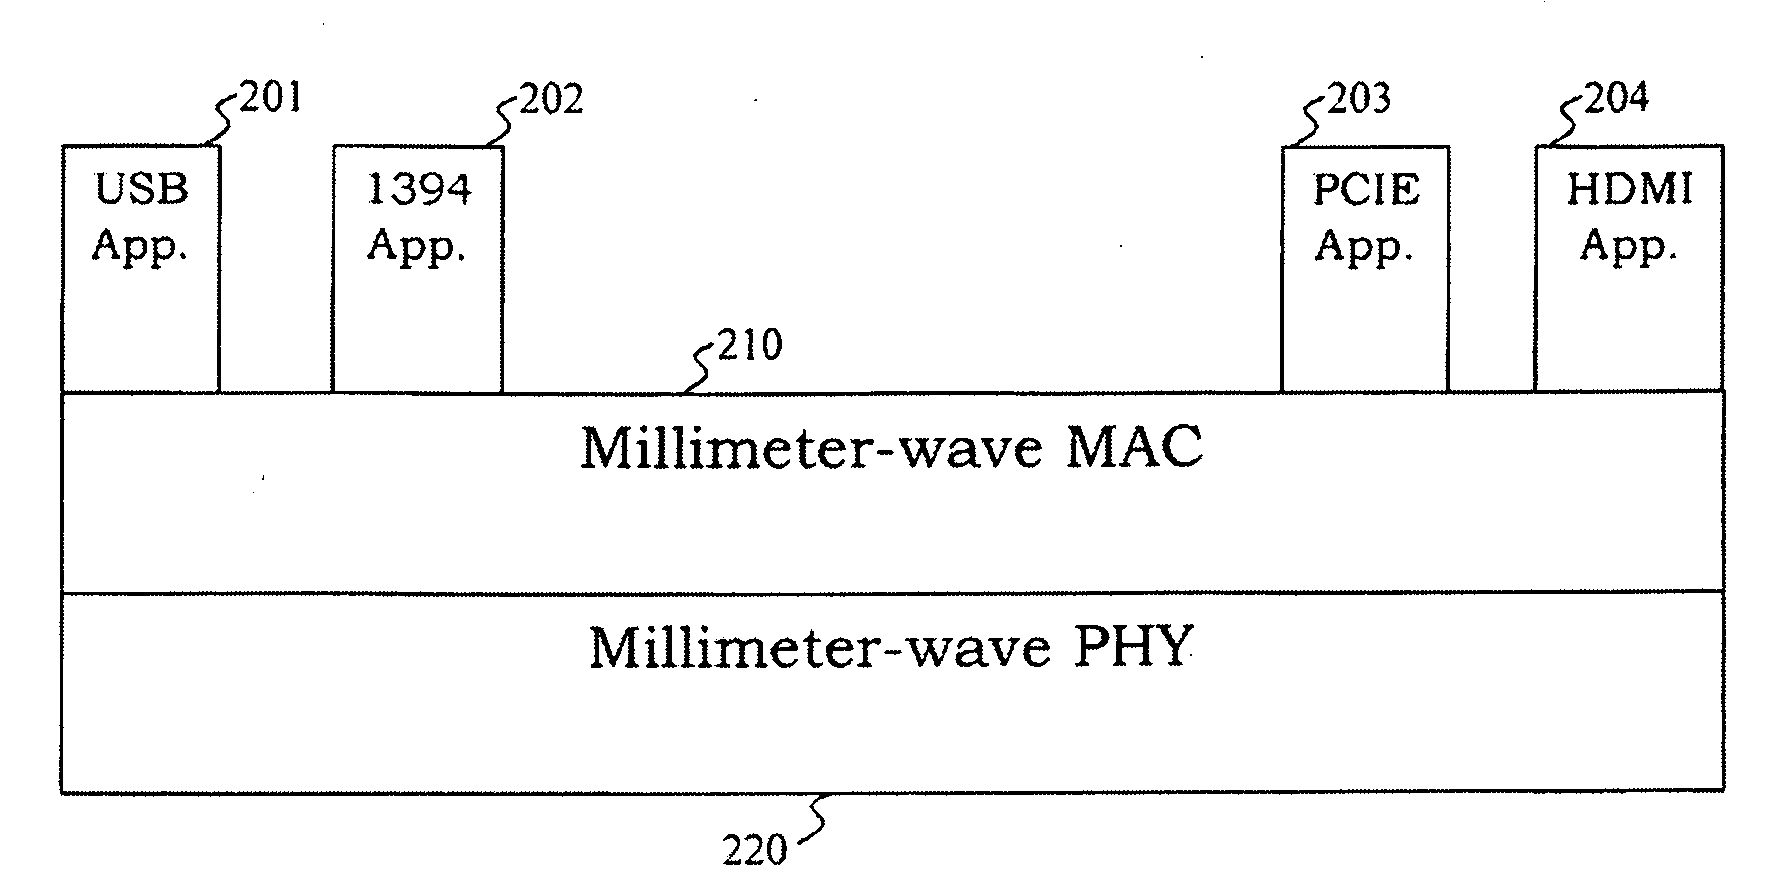 Millimeter-wave communications for peripheral devices